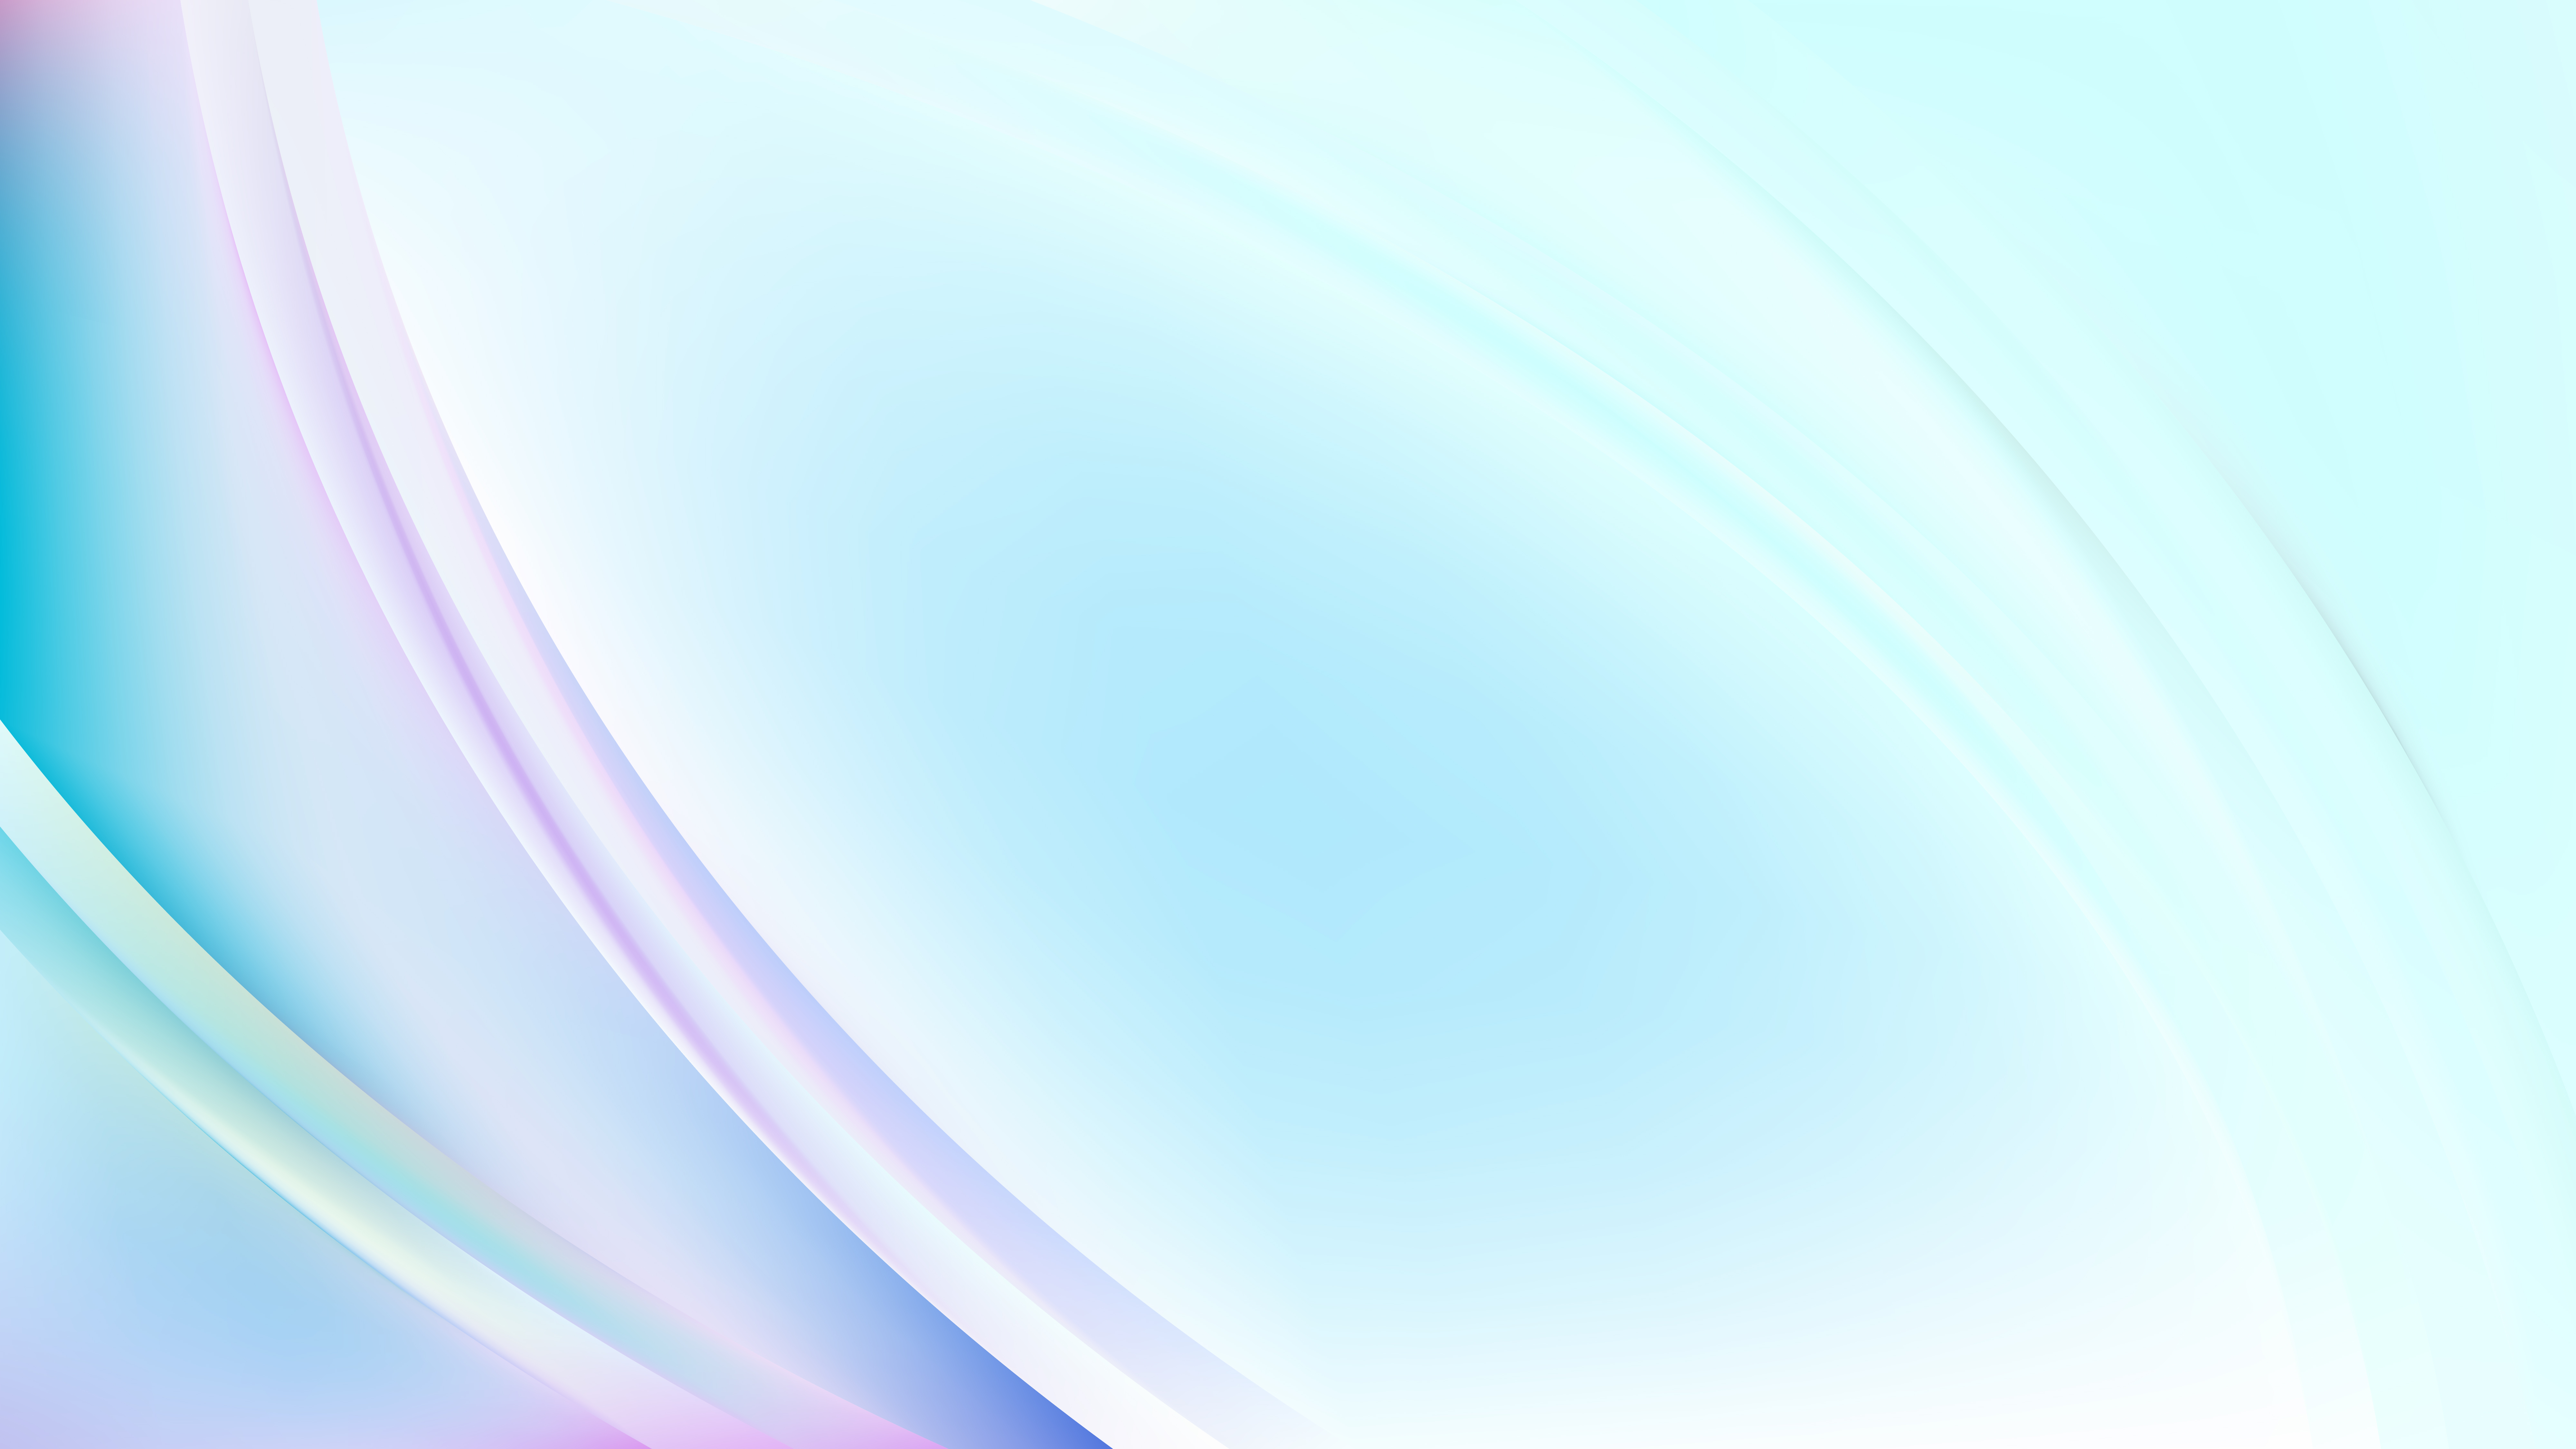 Glowing Abstract Light Blue Wave Background Vector